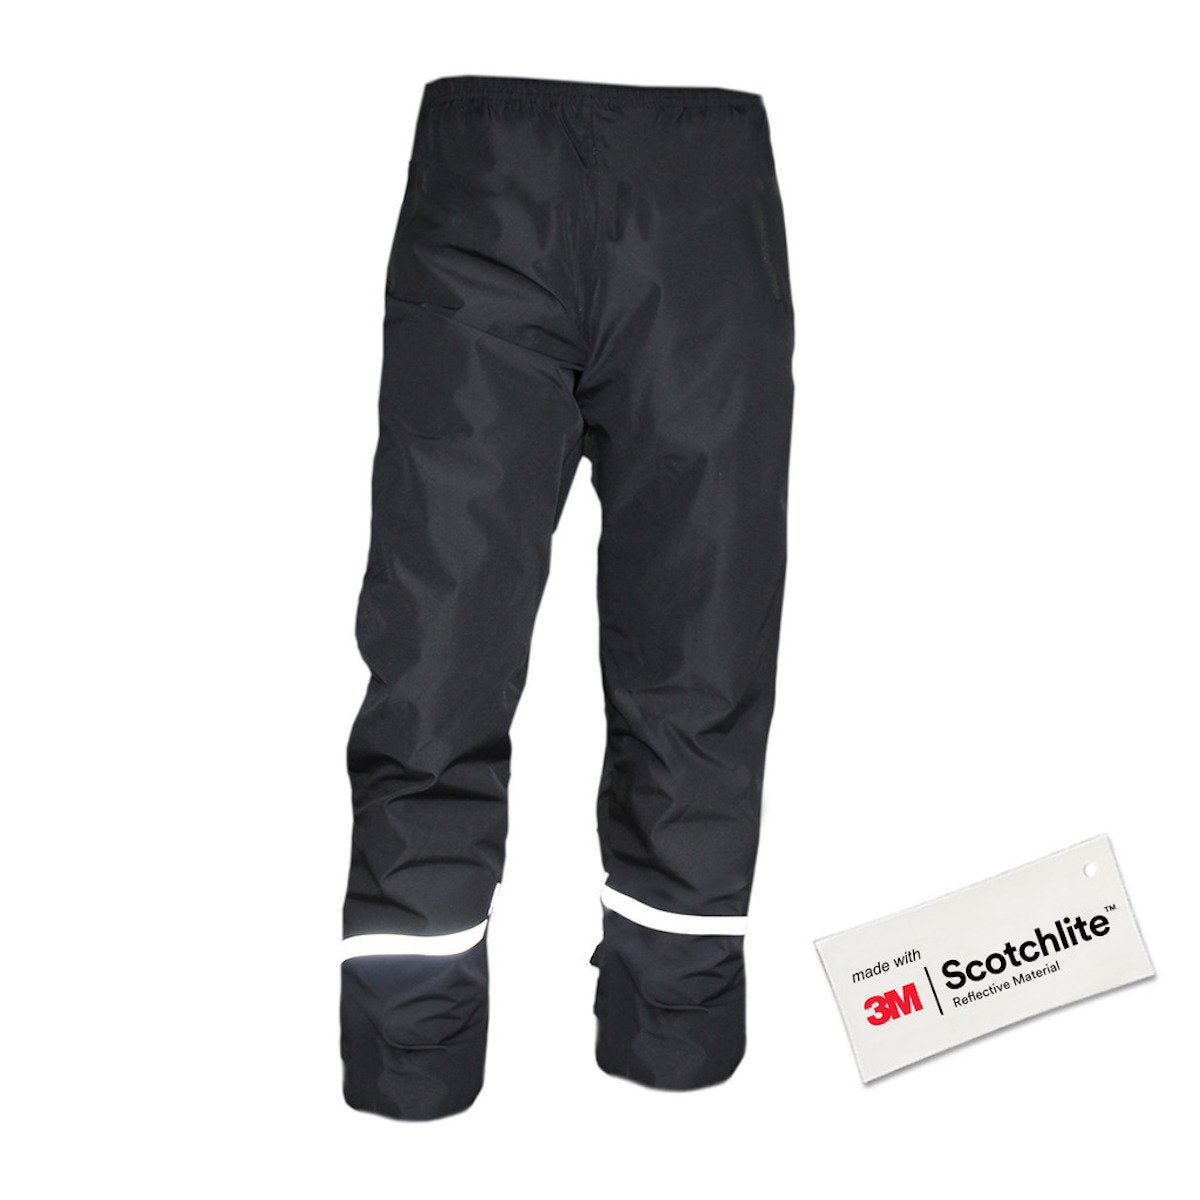 Front of Black rain pants with reflective strips on the lower legs.